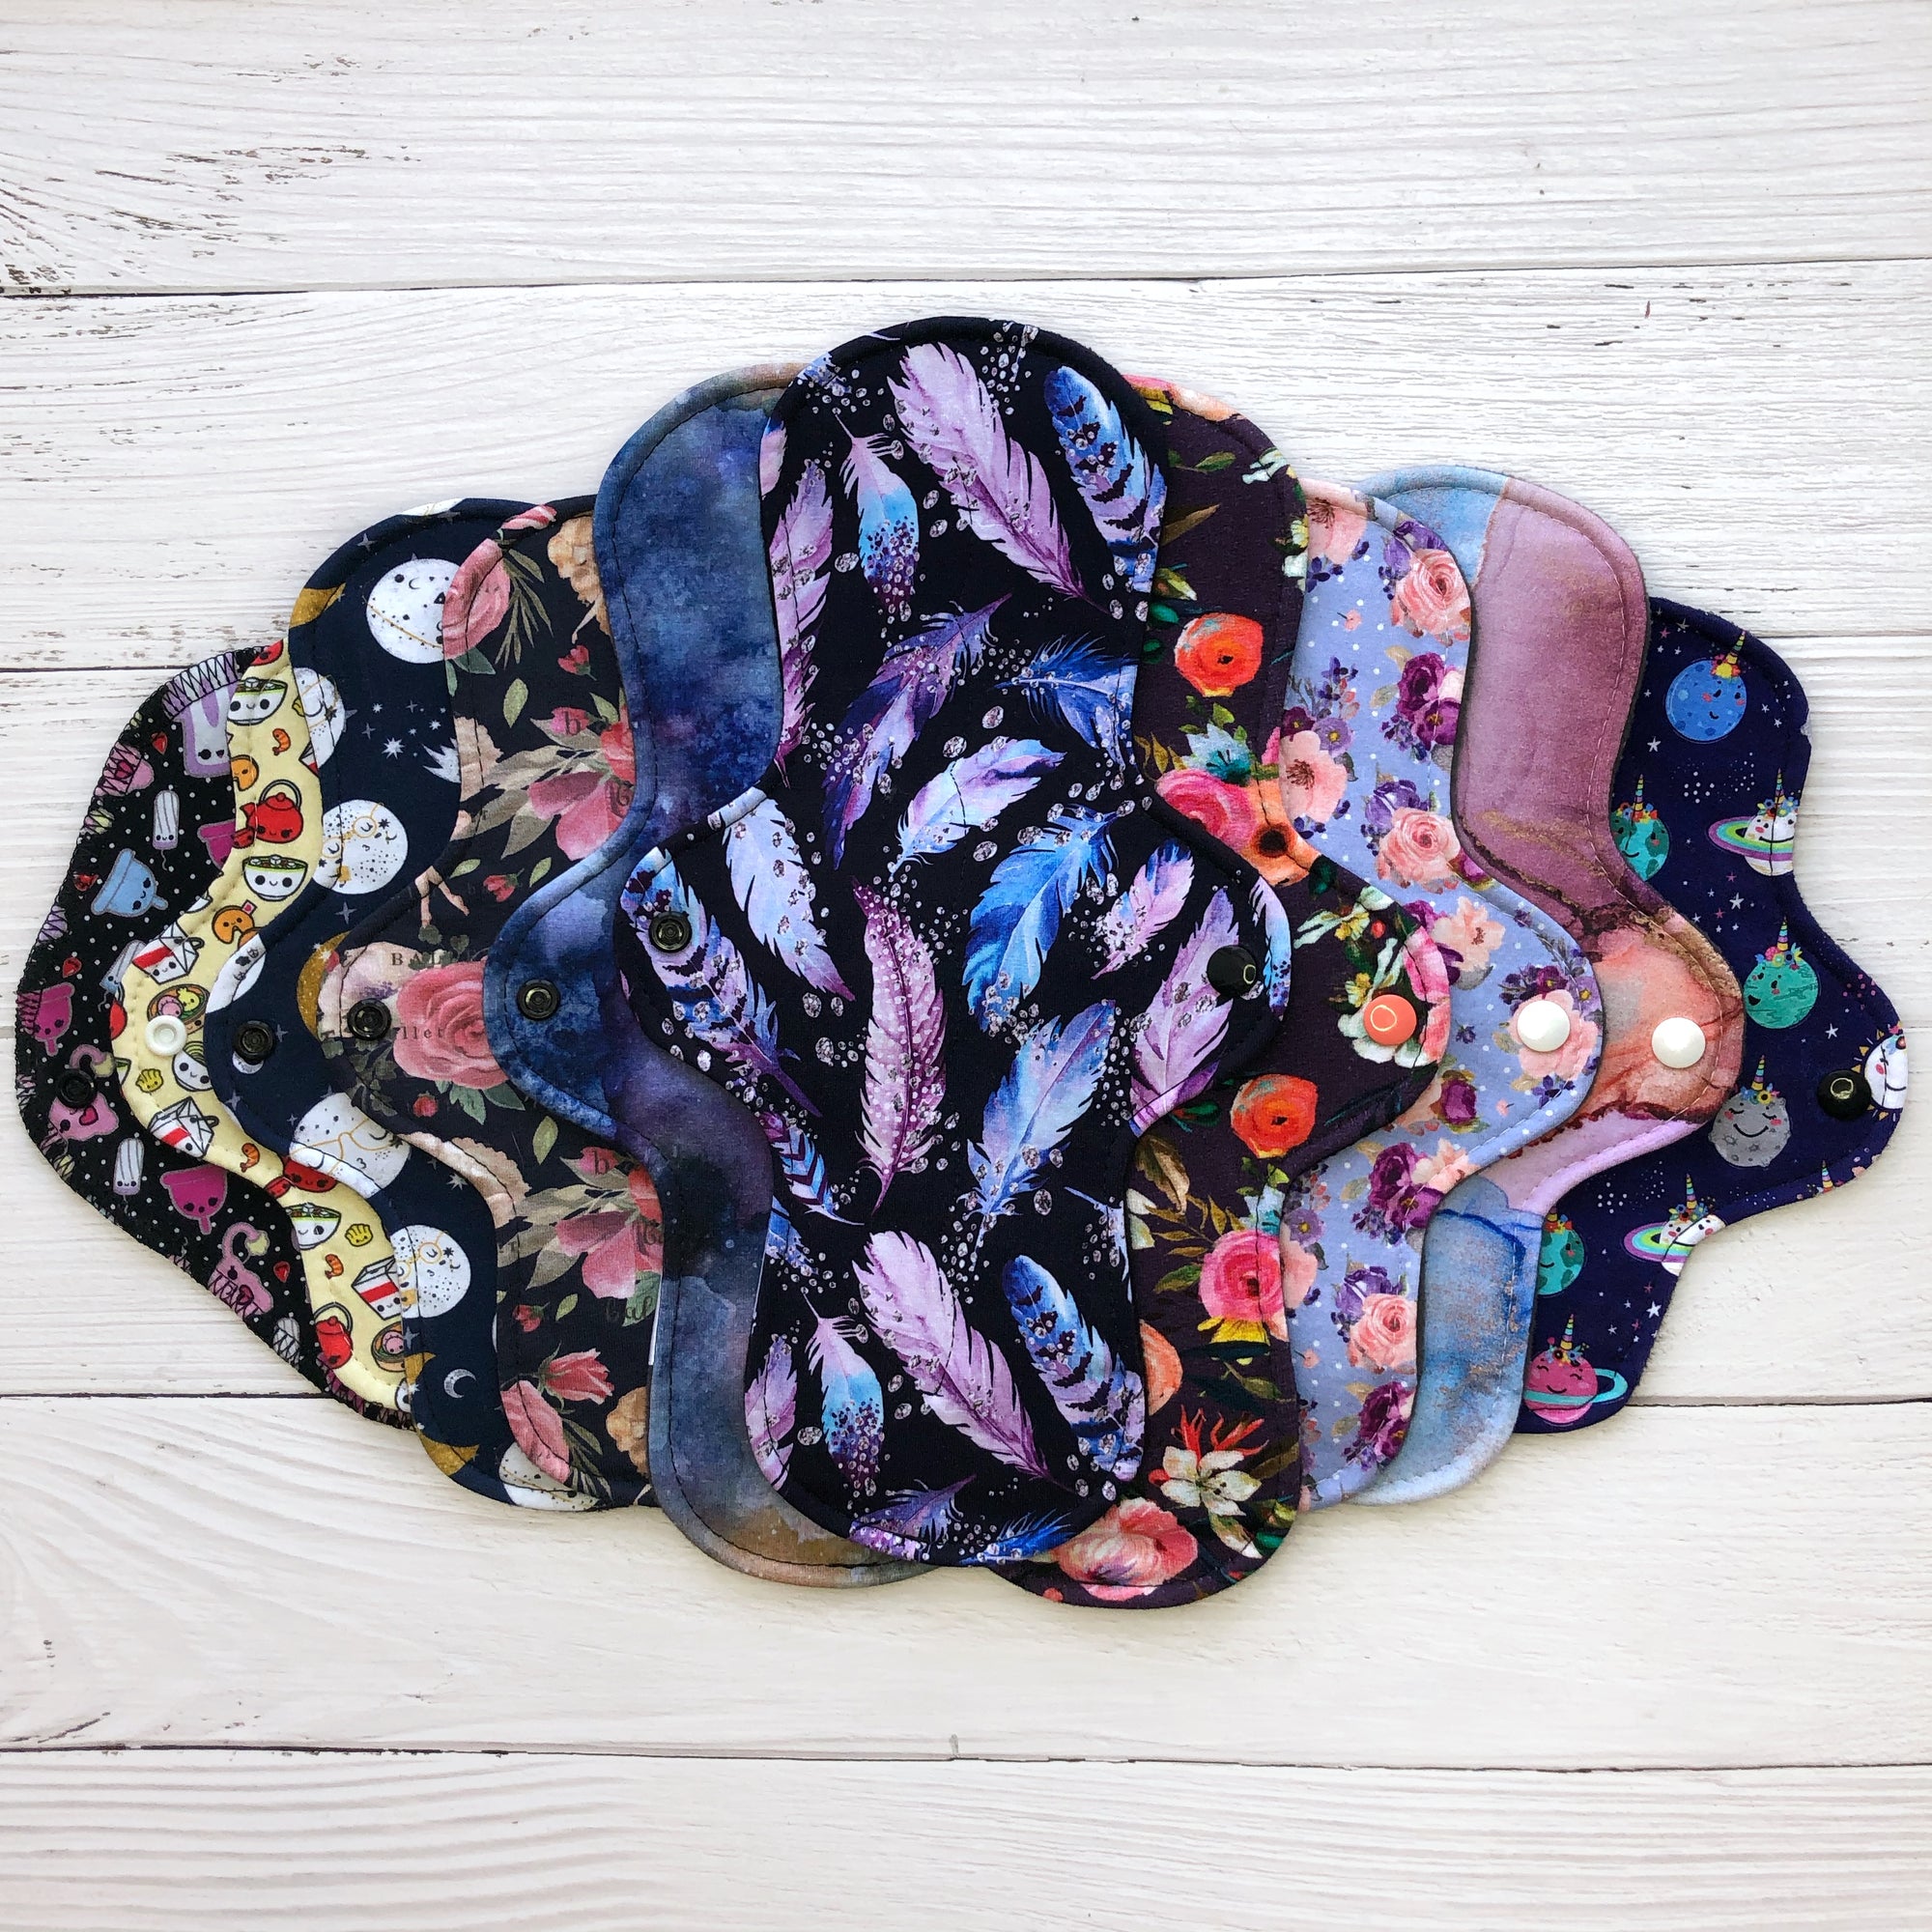 reusable pad starter set with beautiful floral and other prints